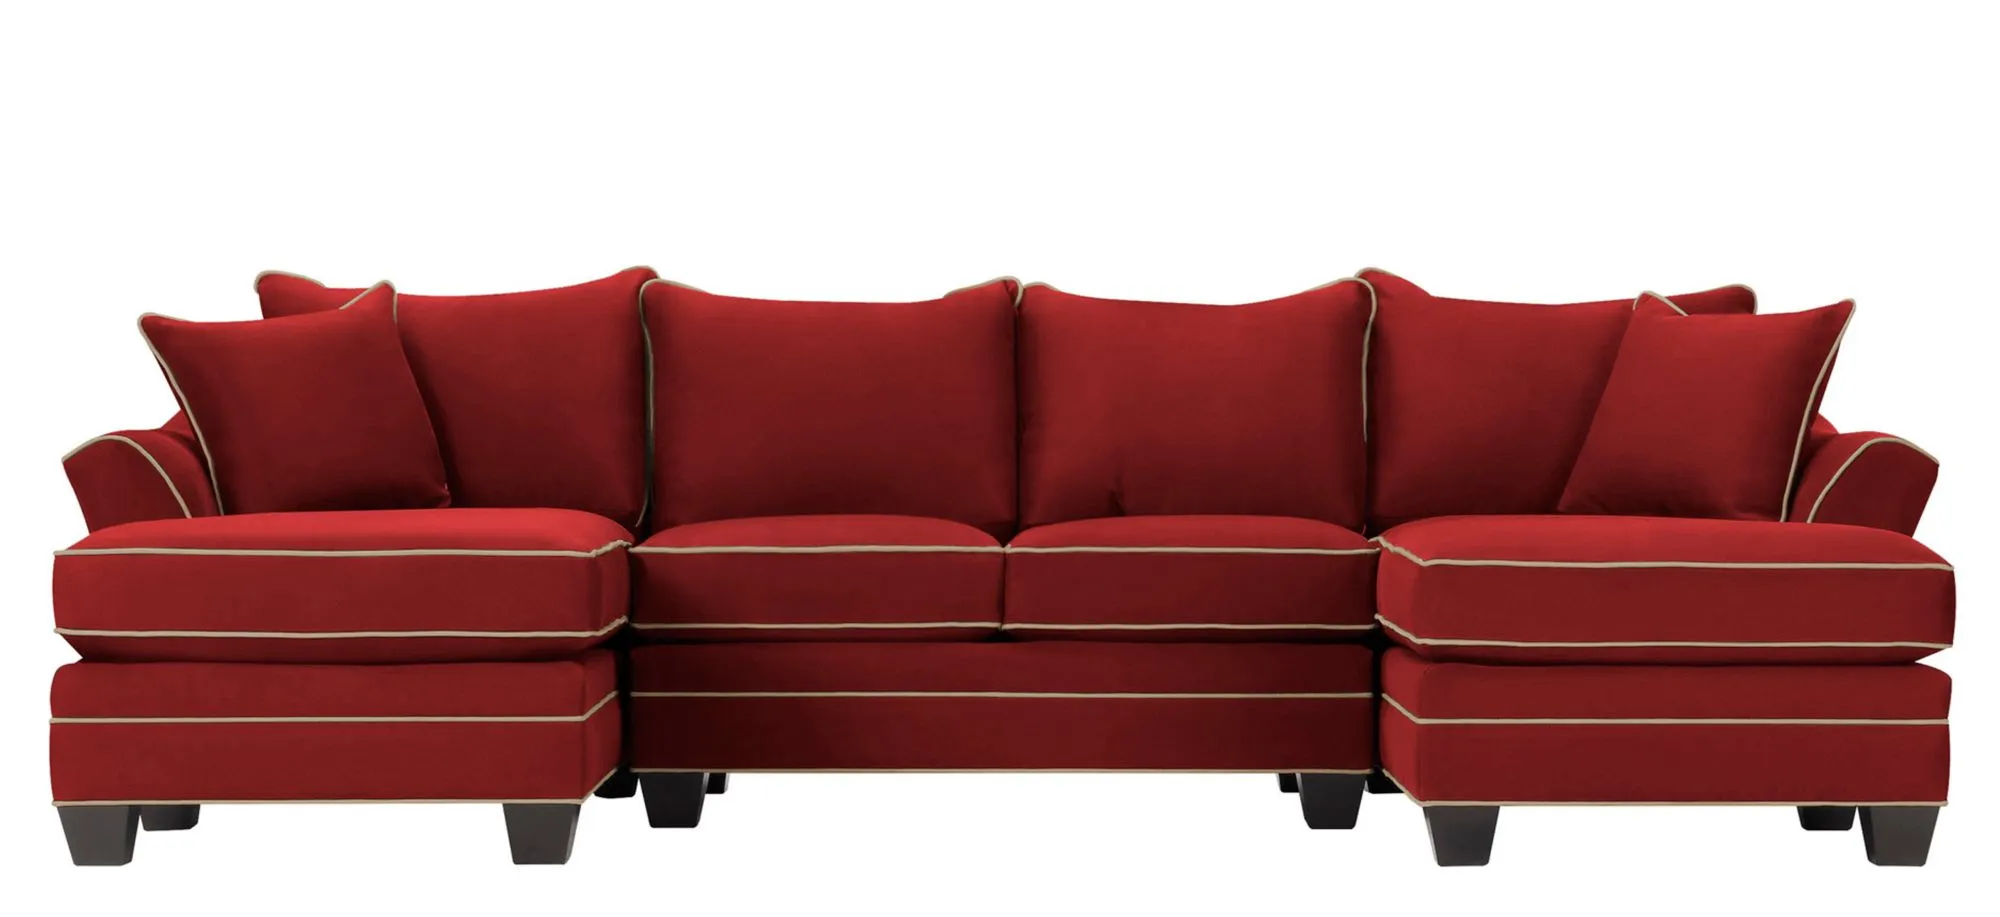 Foresthill 3-pc. Symmetrical Chaise Sectional Sofa in Suede So Soft Cardinal/Mineral by H.M. Richards